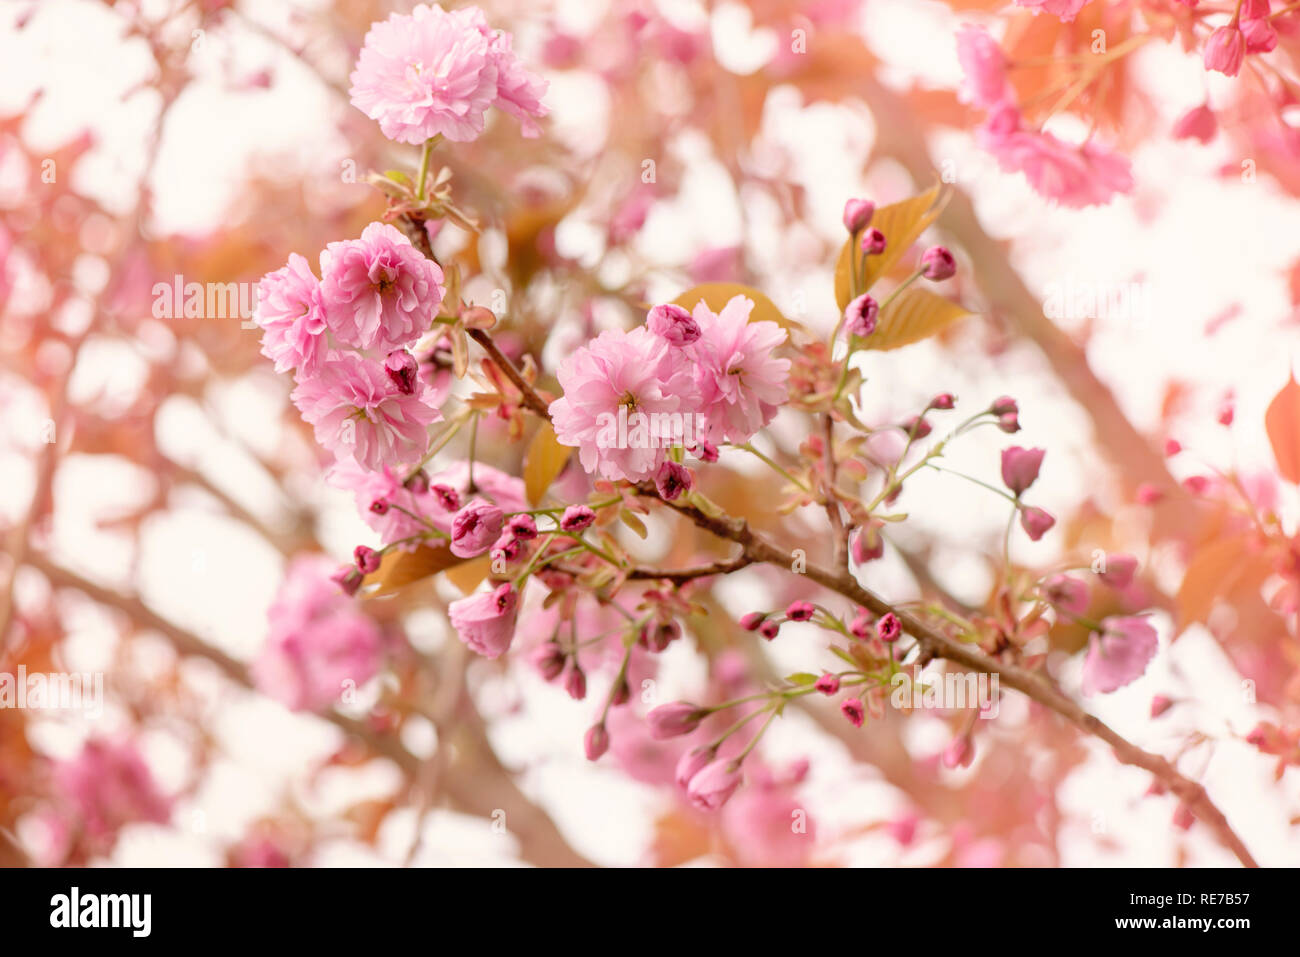 Close-up image of the beautiful spring flowering, pink Cherry Blossom flowers Stock Photo